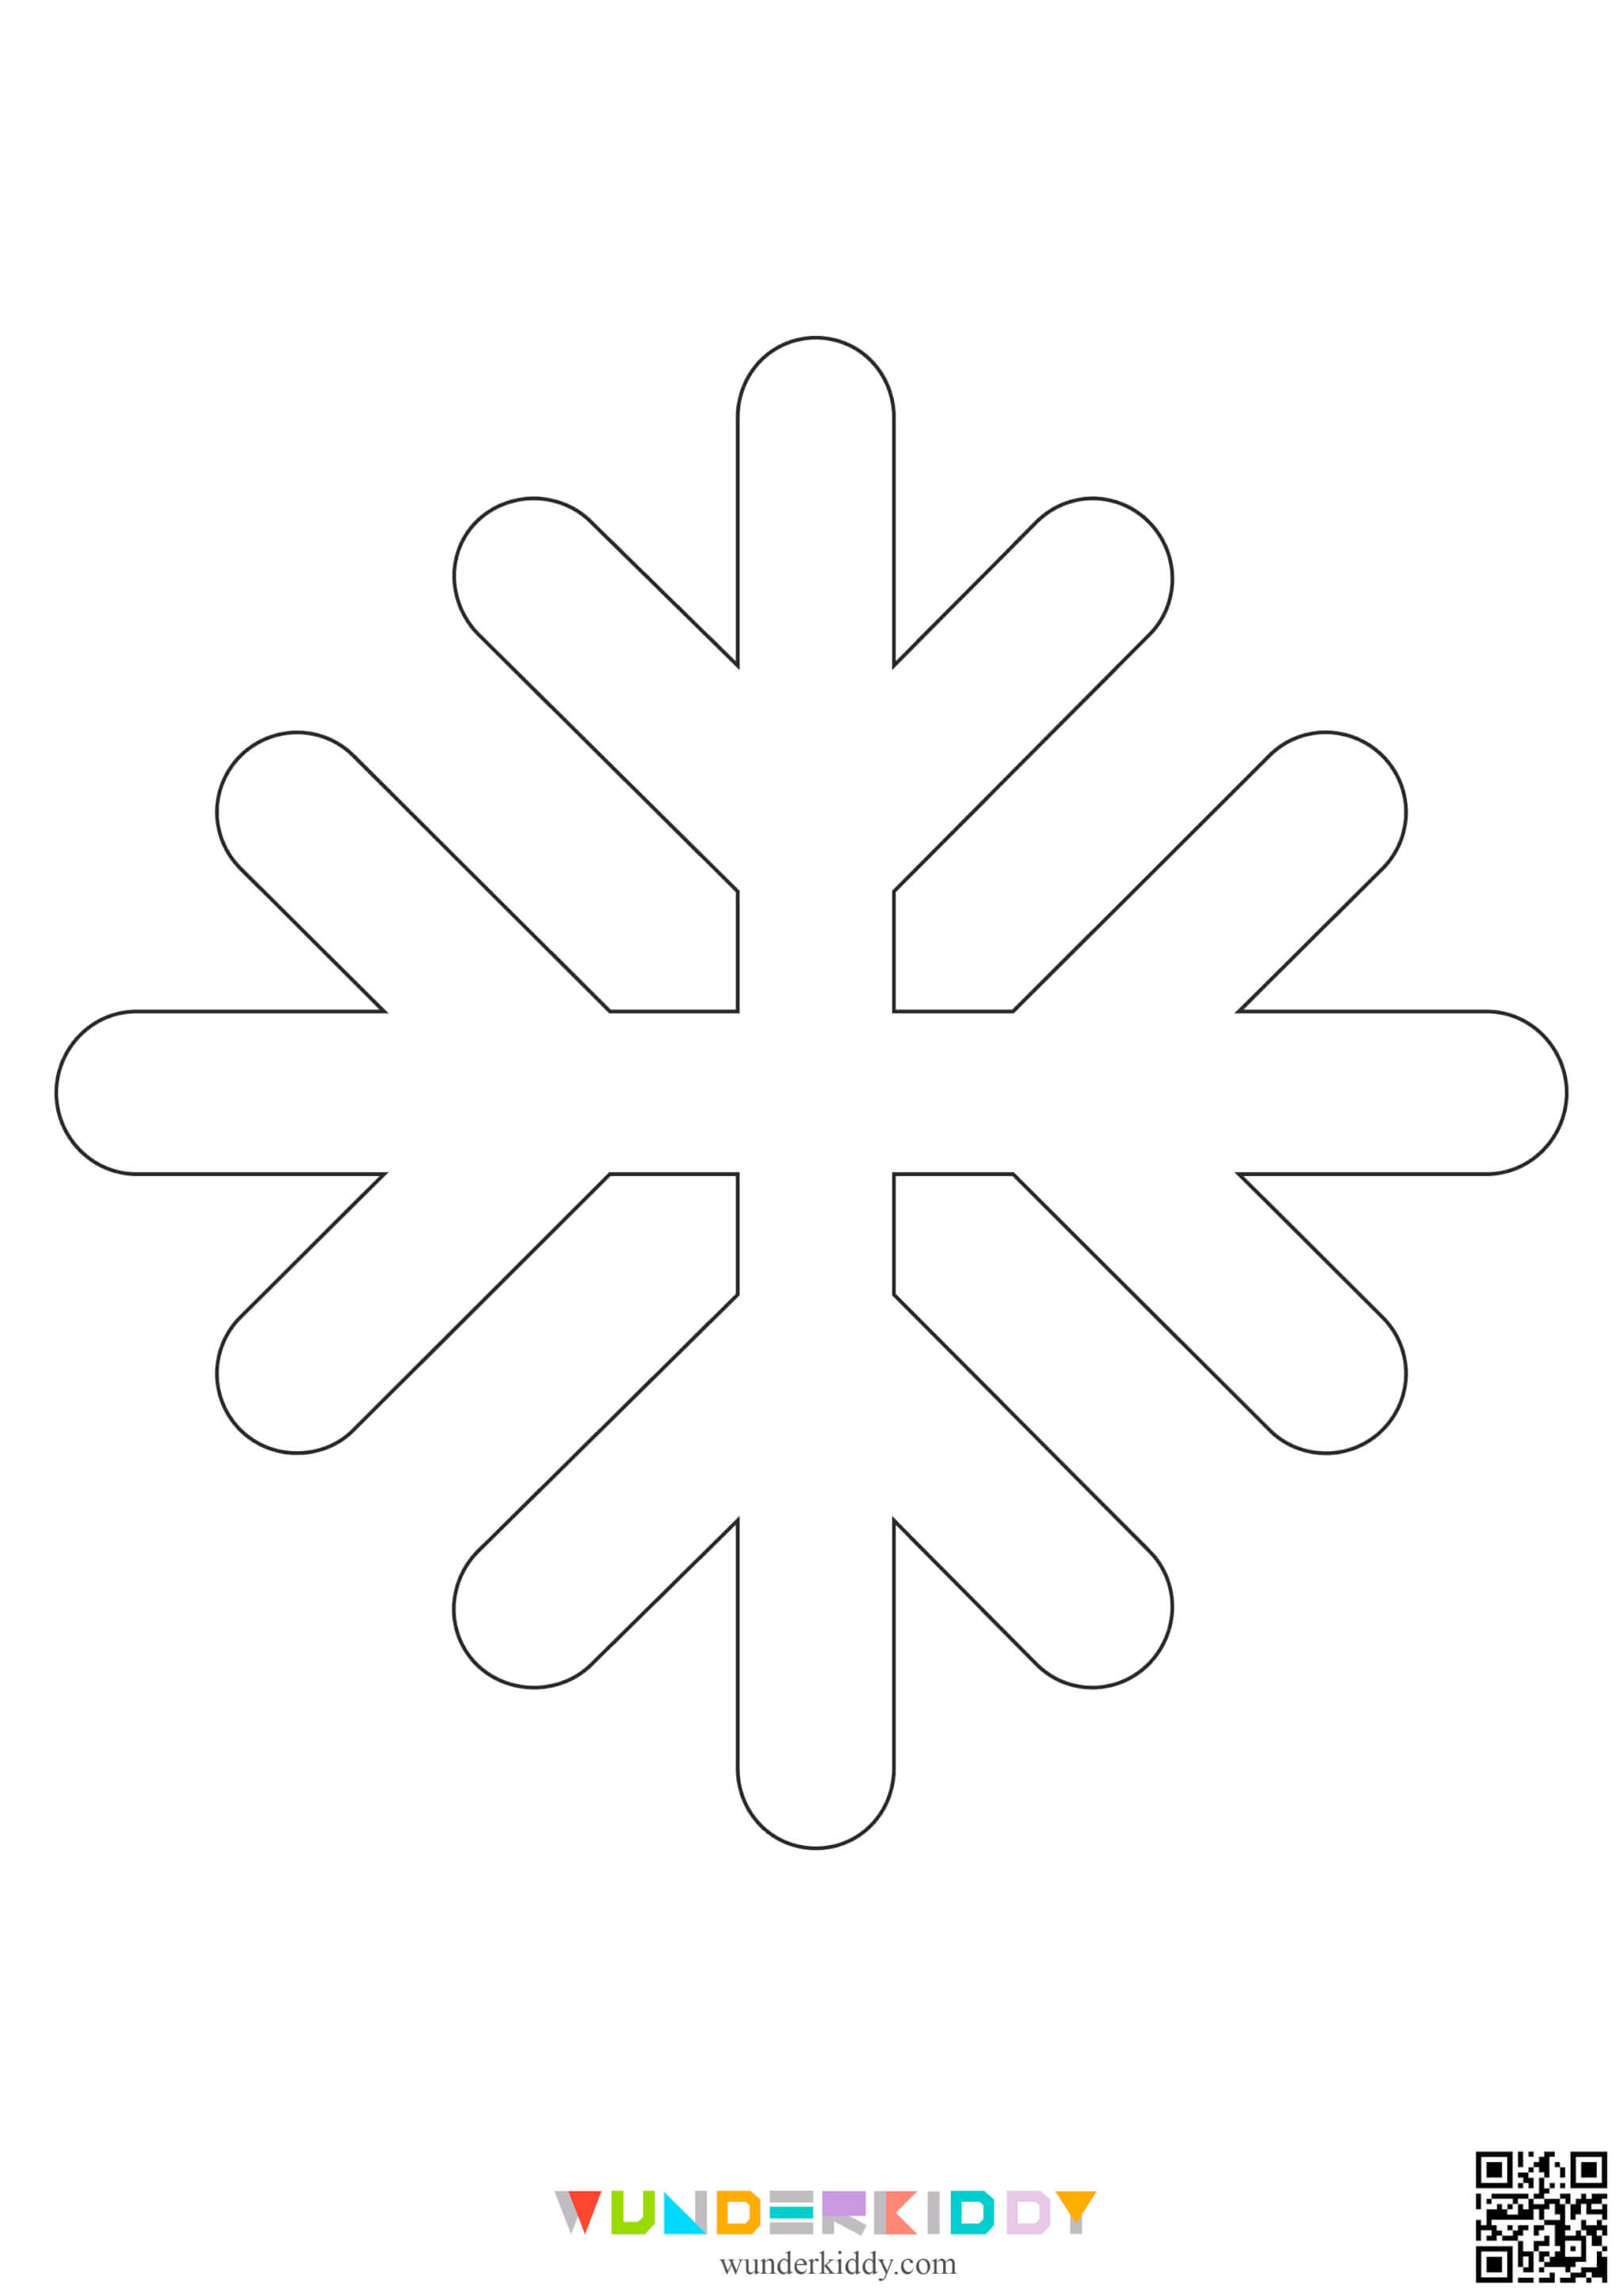 Snowflakes Template - Image 2